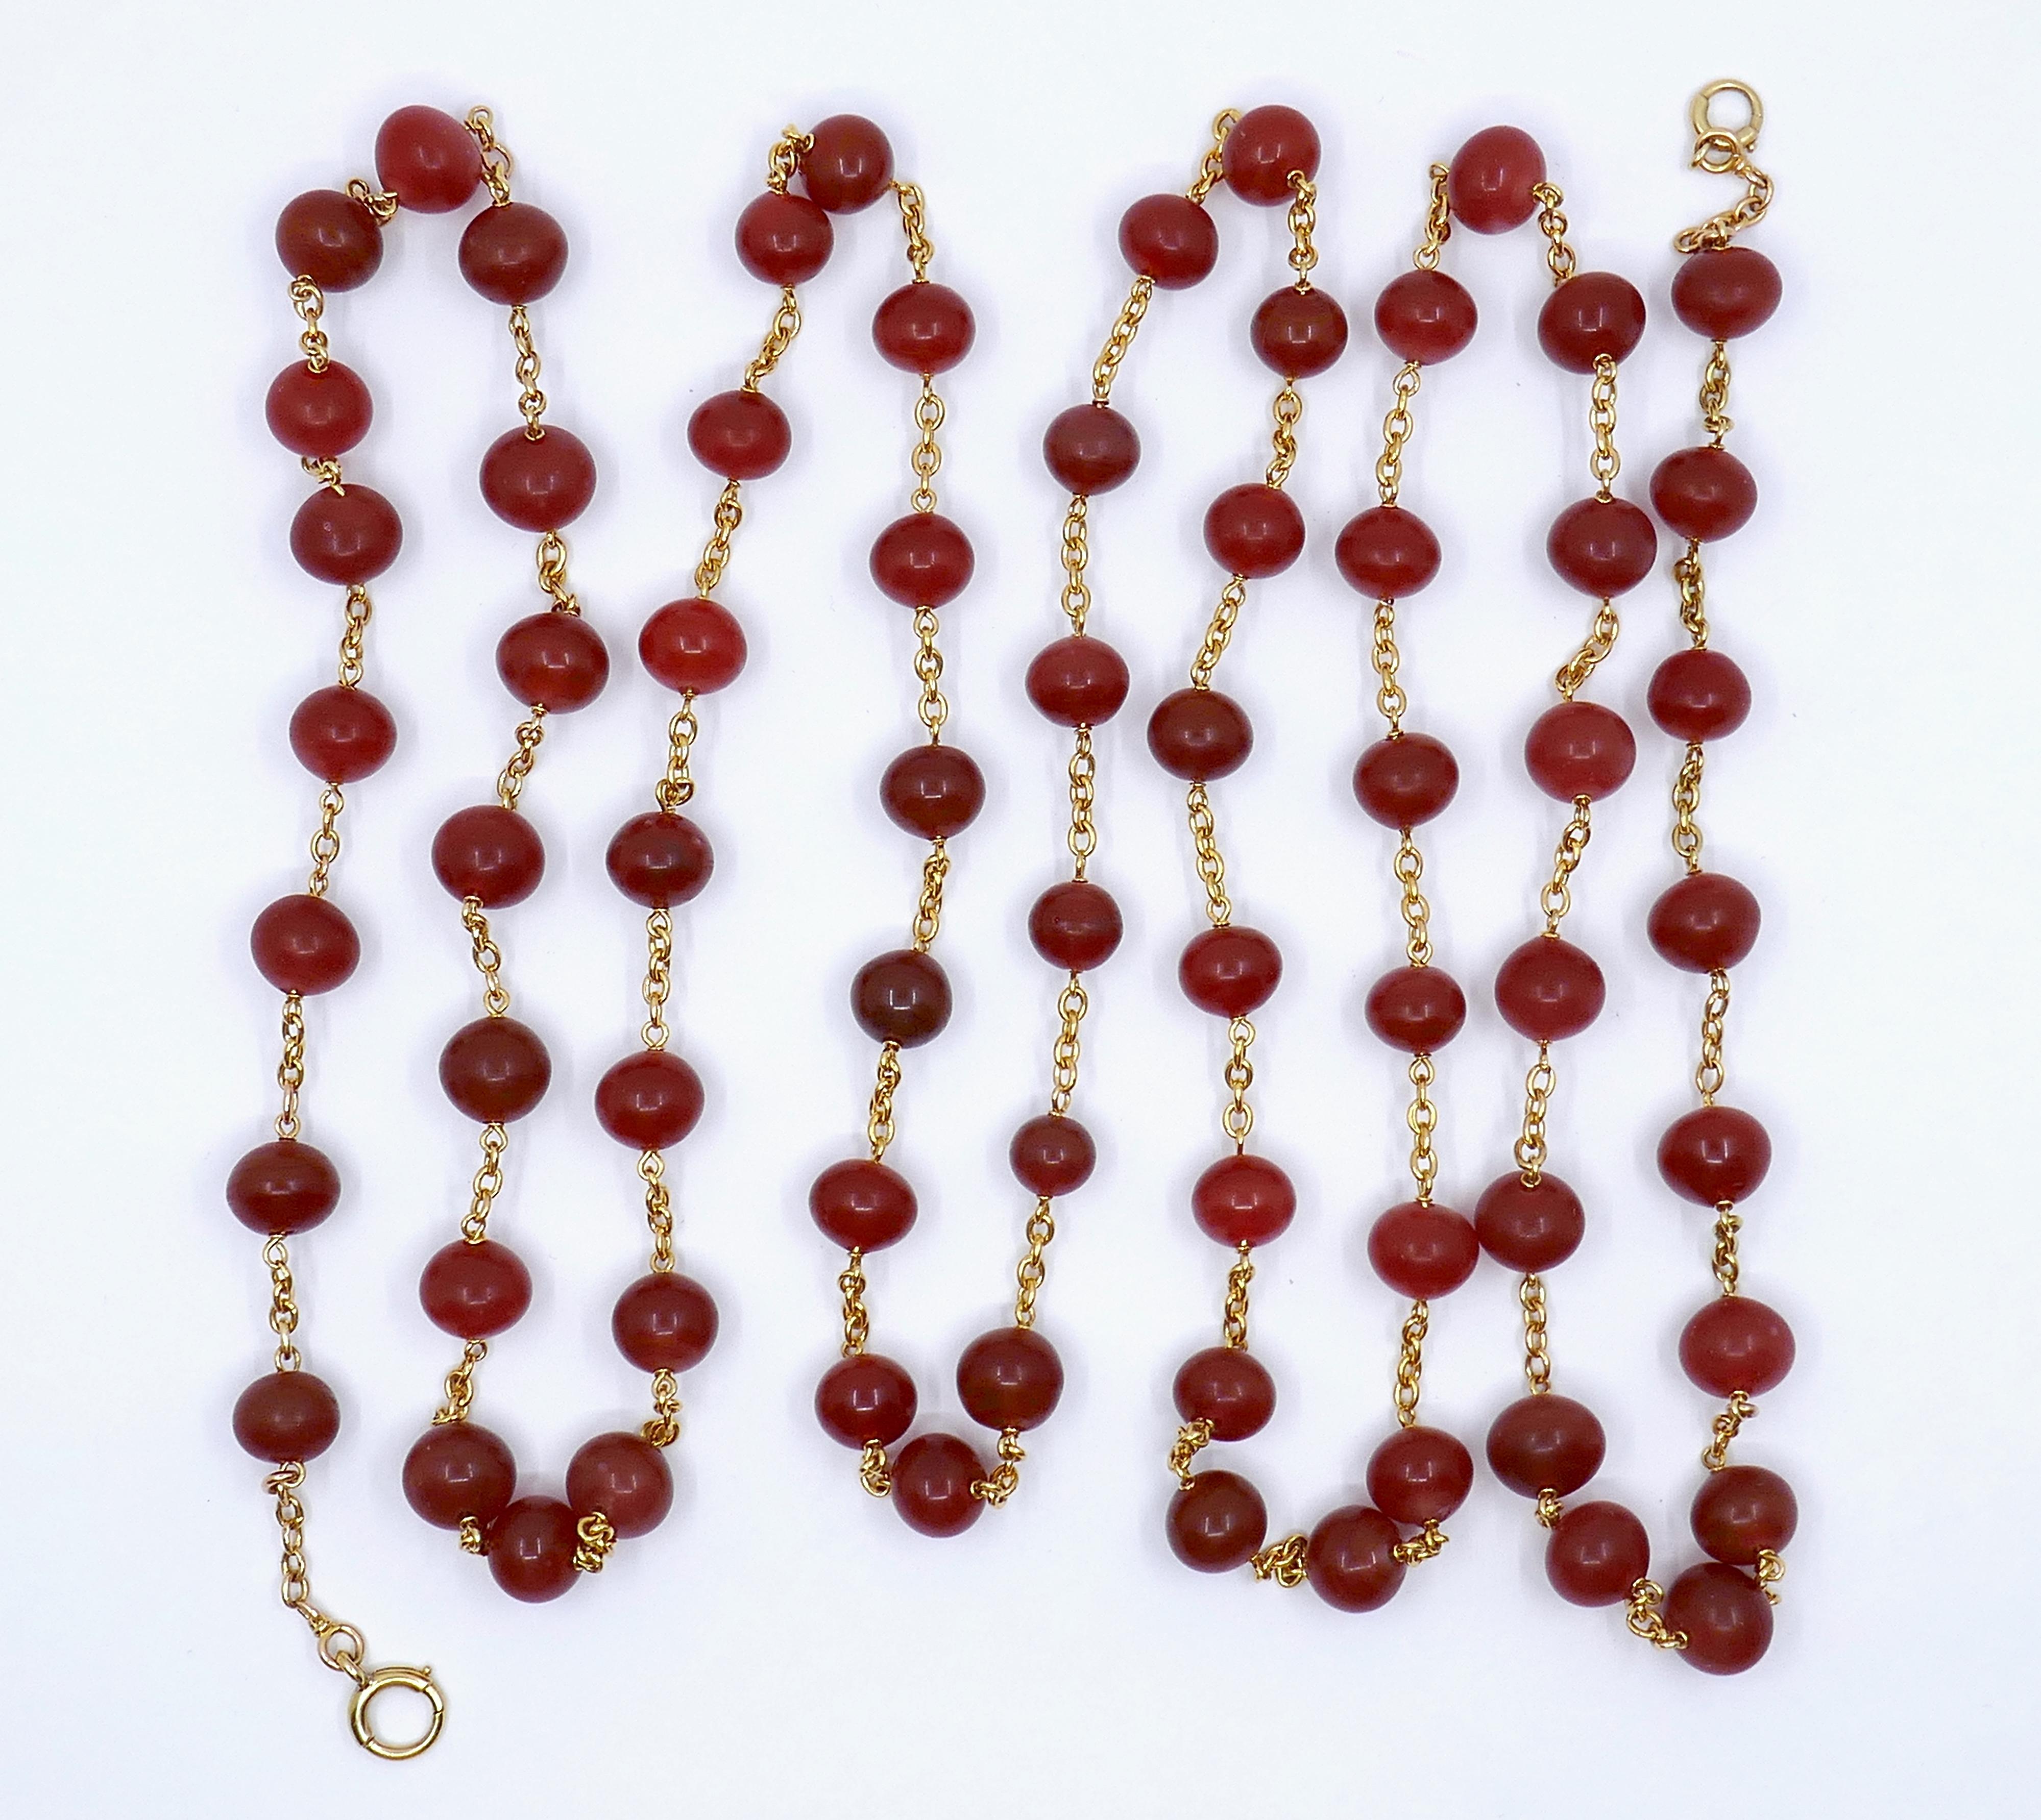 This Carnelian Gemstone Beaded 18k Gold Chain Necklace is a striking and versatile accessory that radiates warmth and sophistication. The rich, fiery hues of the carnelian gemstone beads, which vary in color and shape, are beautifully complemented